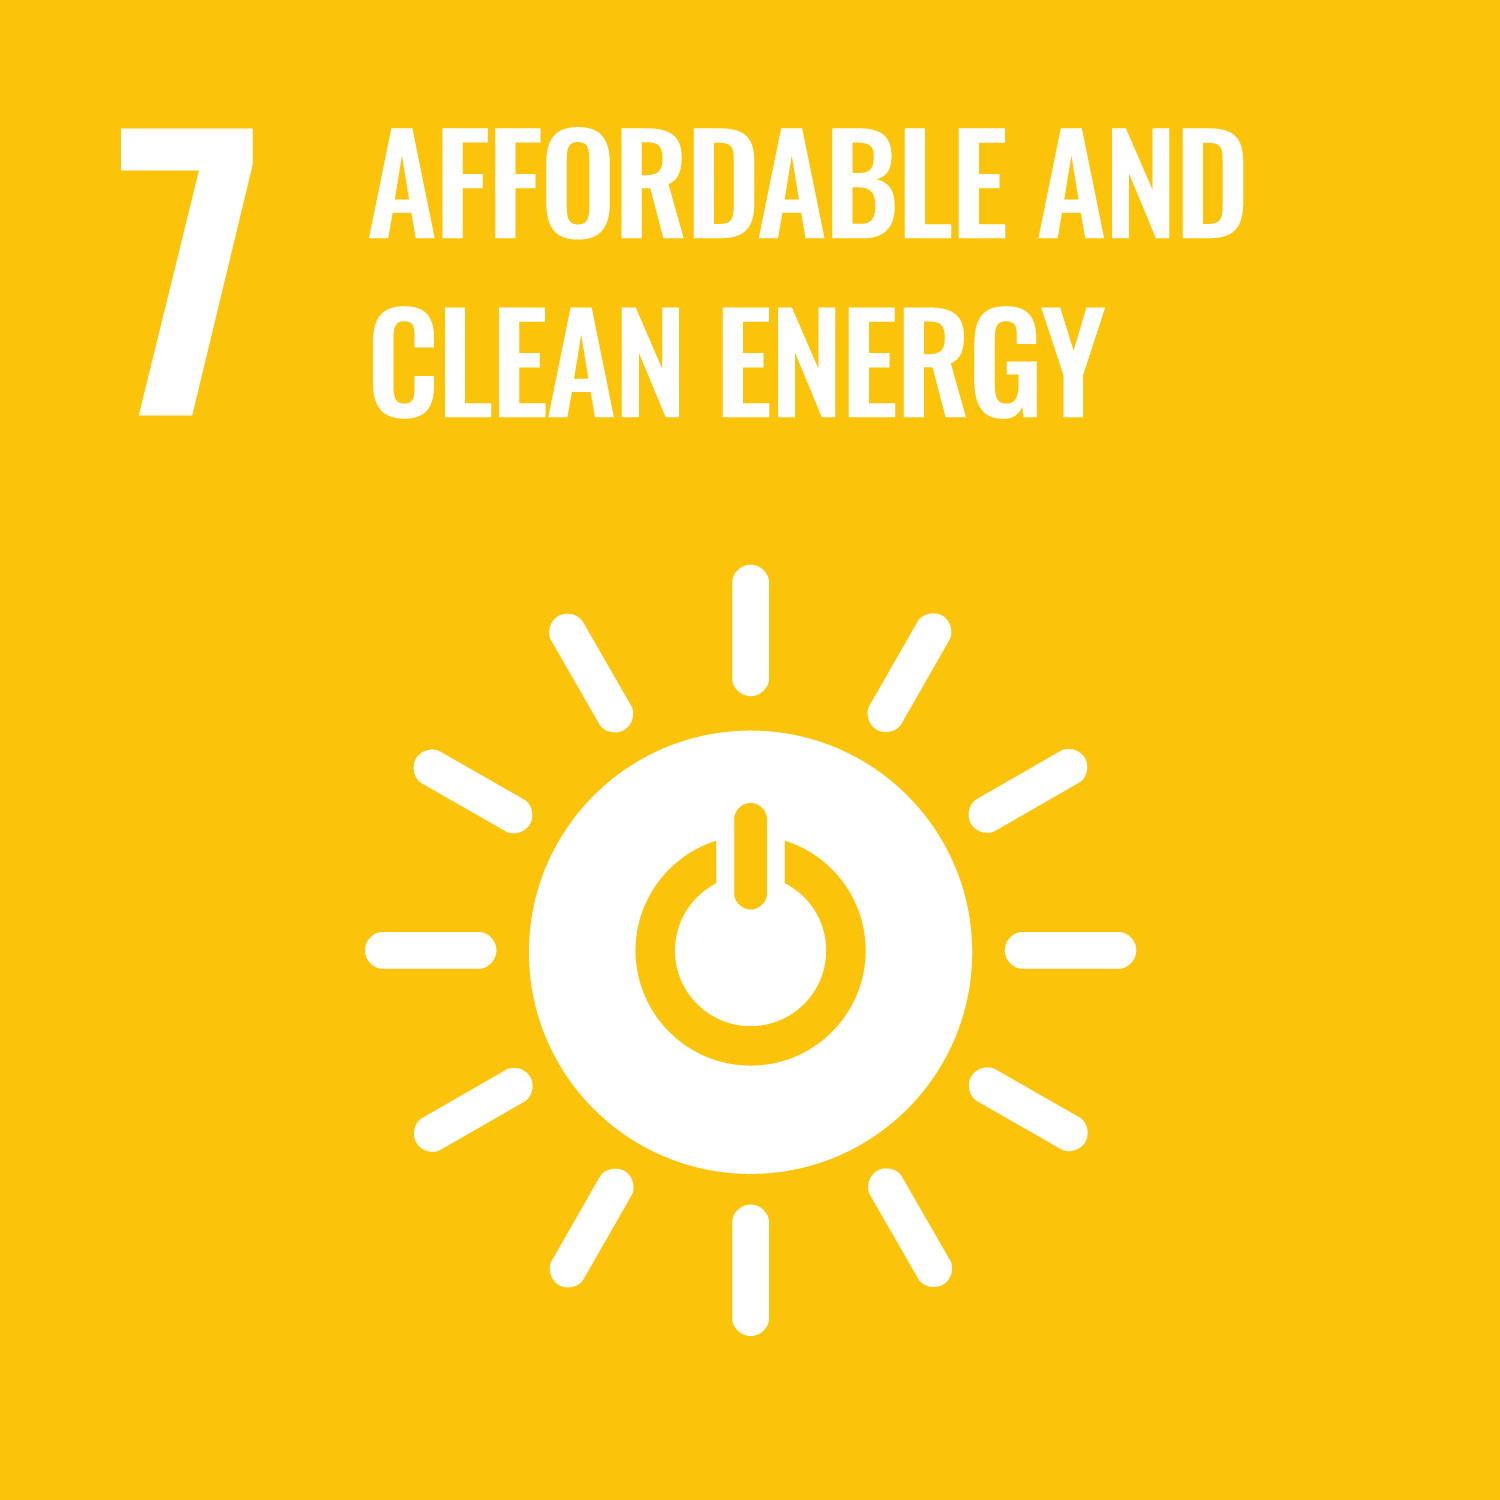 UN SDG goal 7: Affordable and clean energy